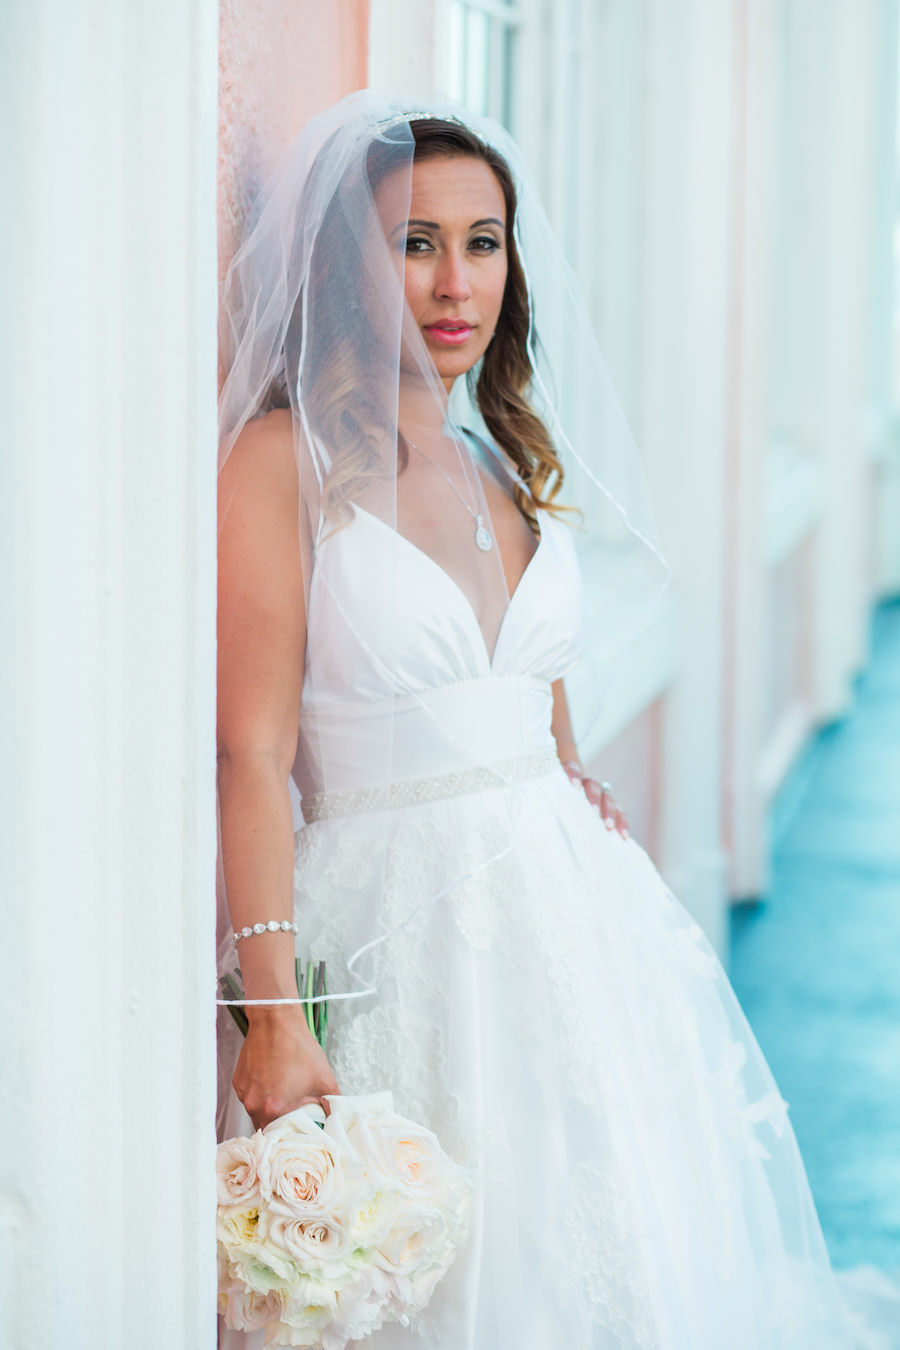 St. Pete Bride Wedding Portrait with White and Blush Phink Peony Bouquet